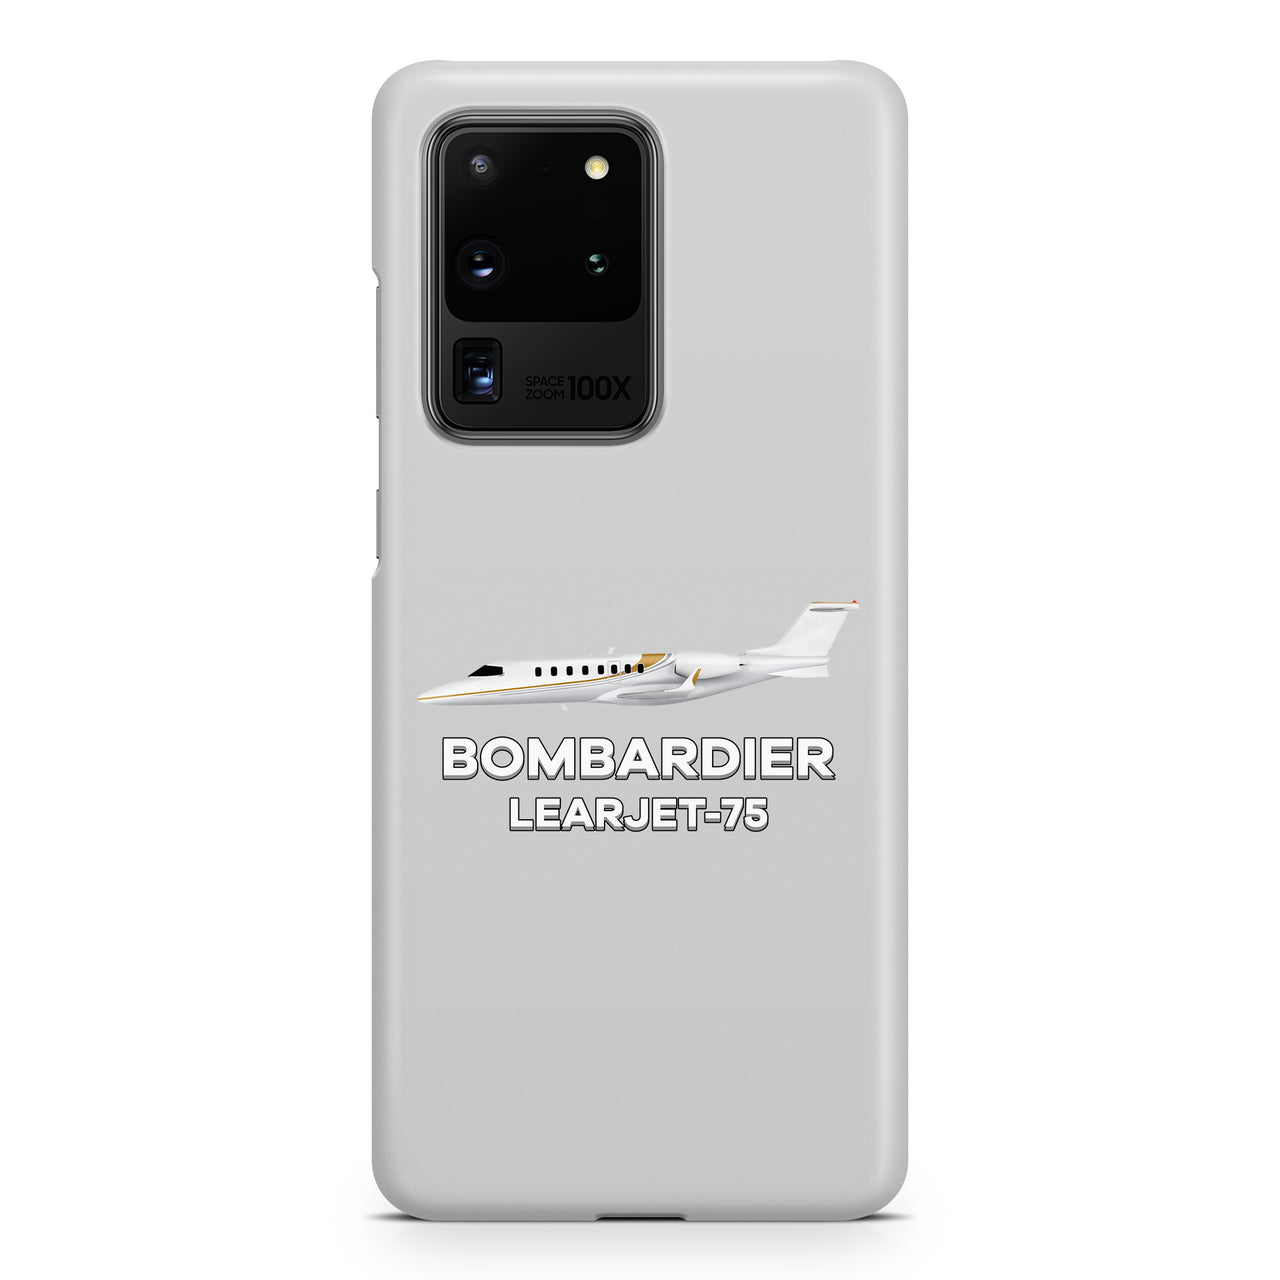 The Bombardier Learjet 75 Samsung S & Note Cases